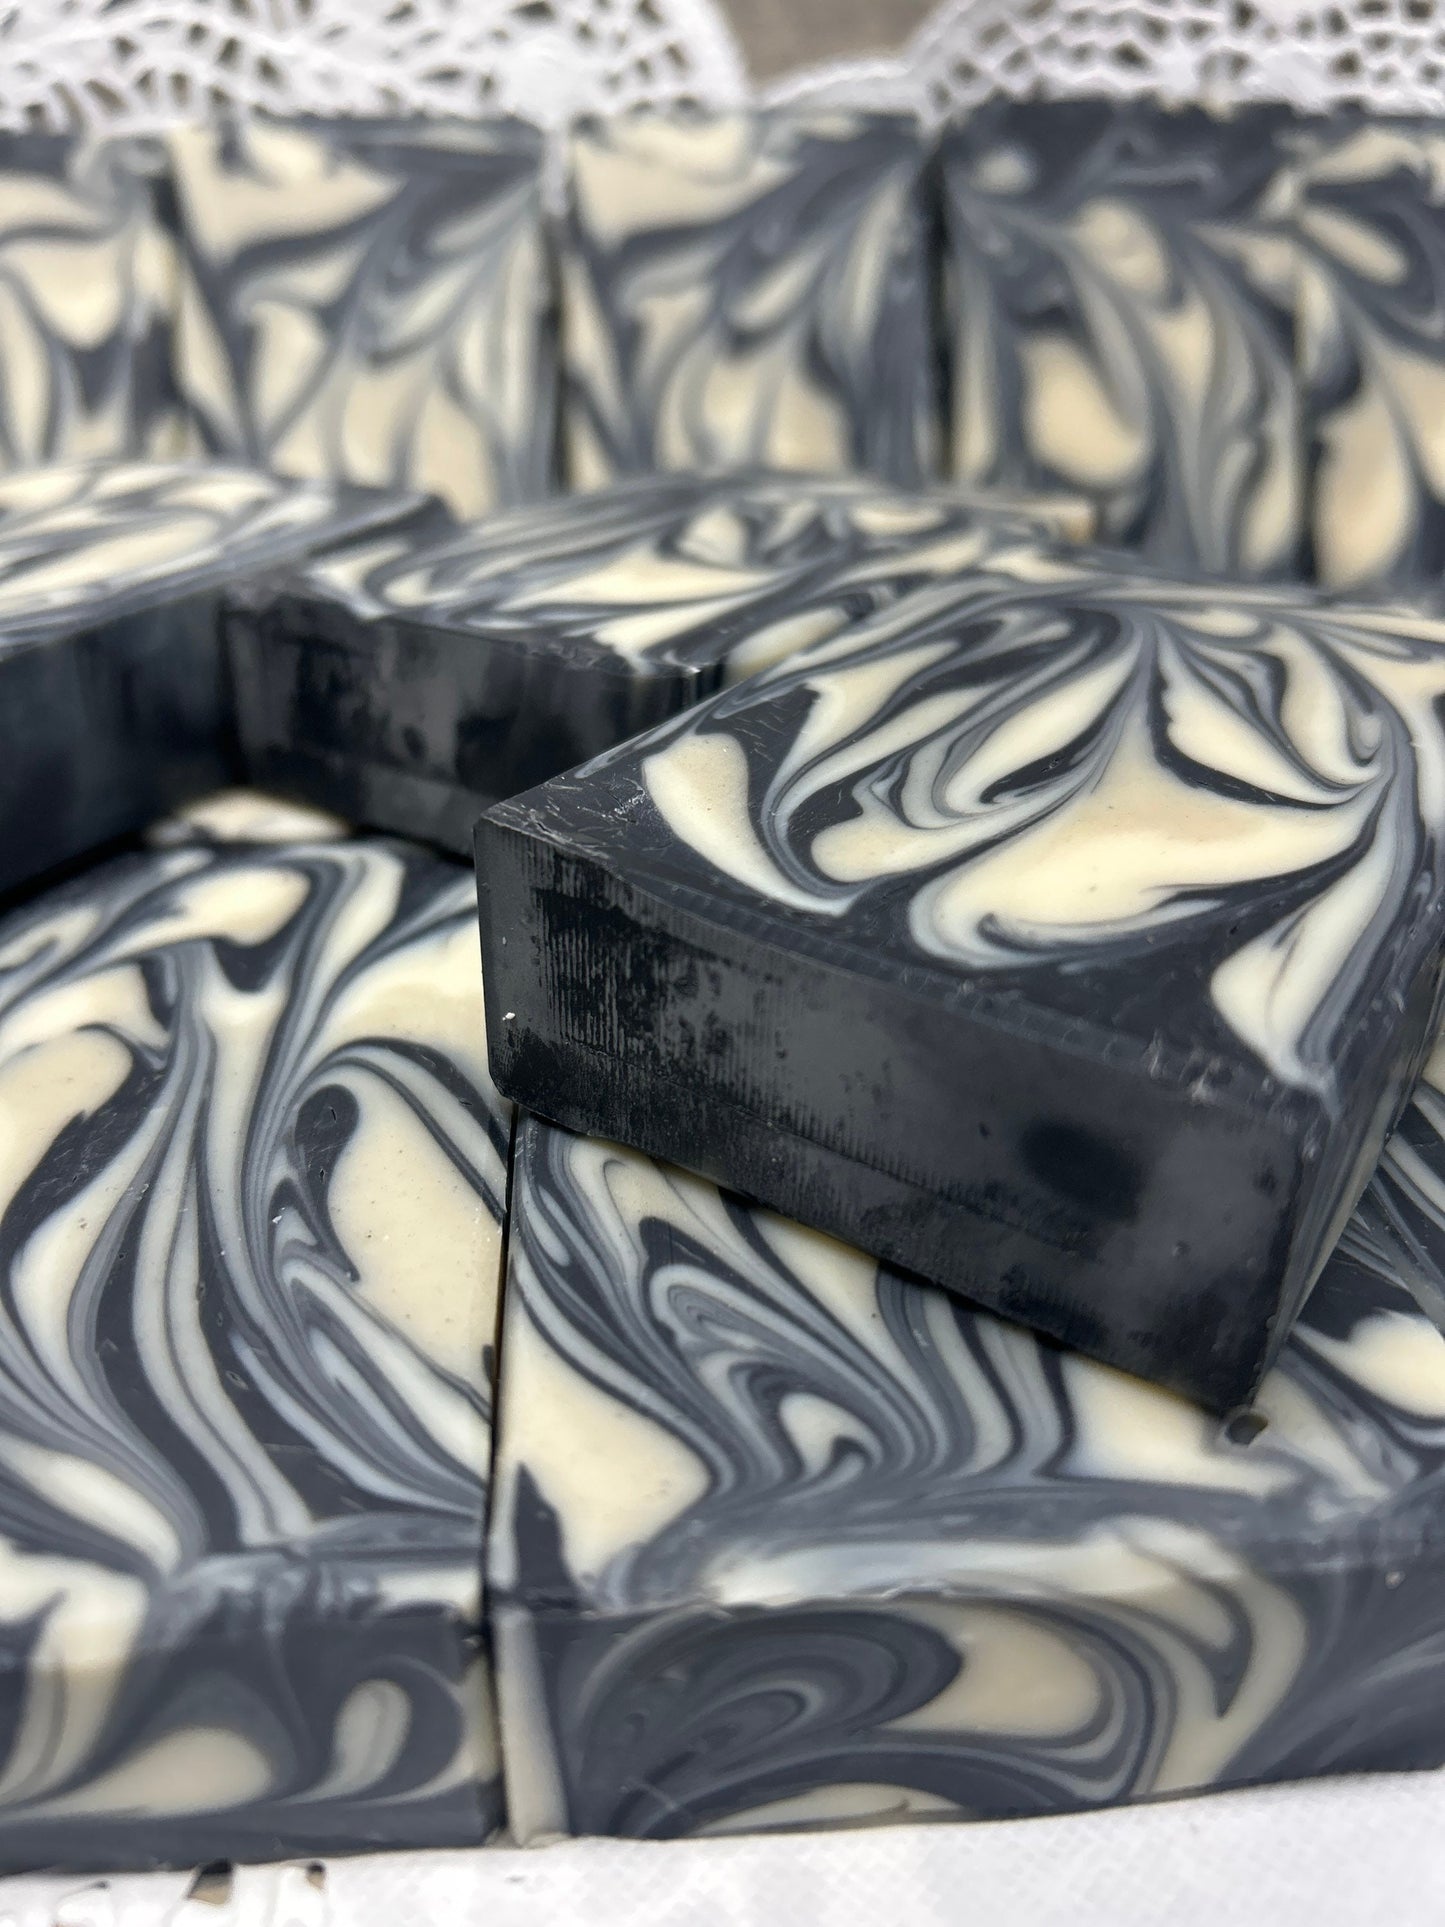 Acne Bentonite Clay & Charcoal Bar Soap, lathers beautifully, leaves your skin clean!